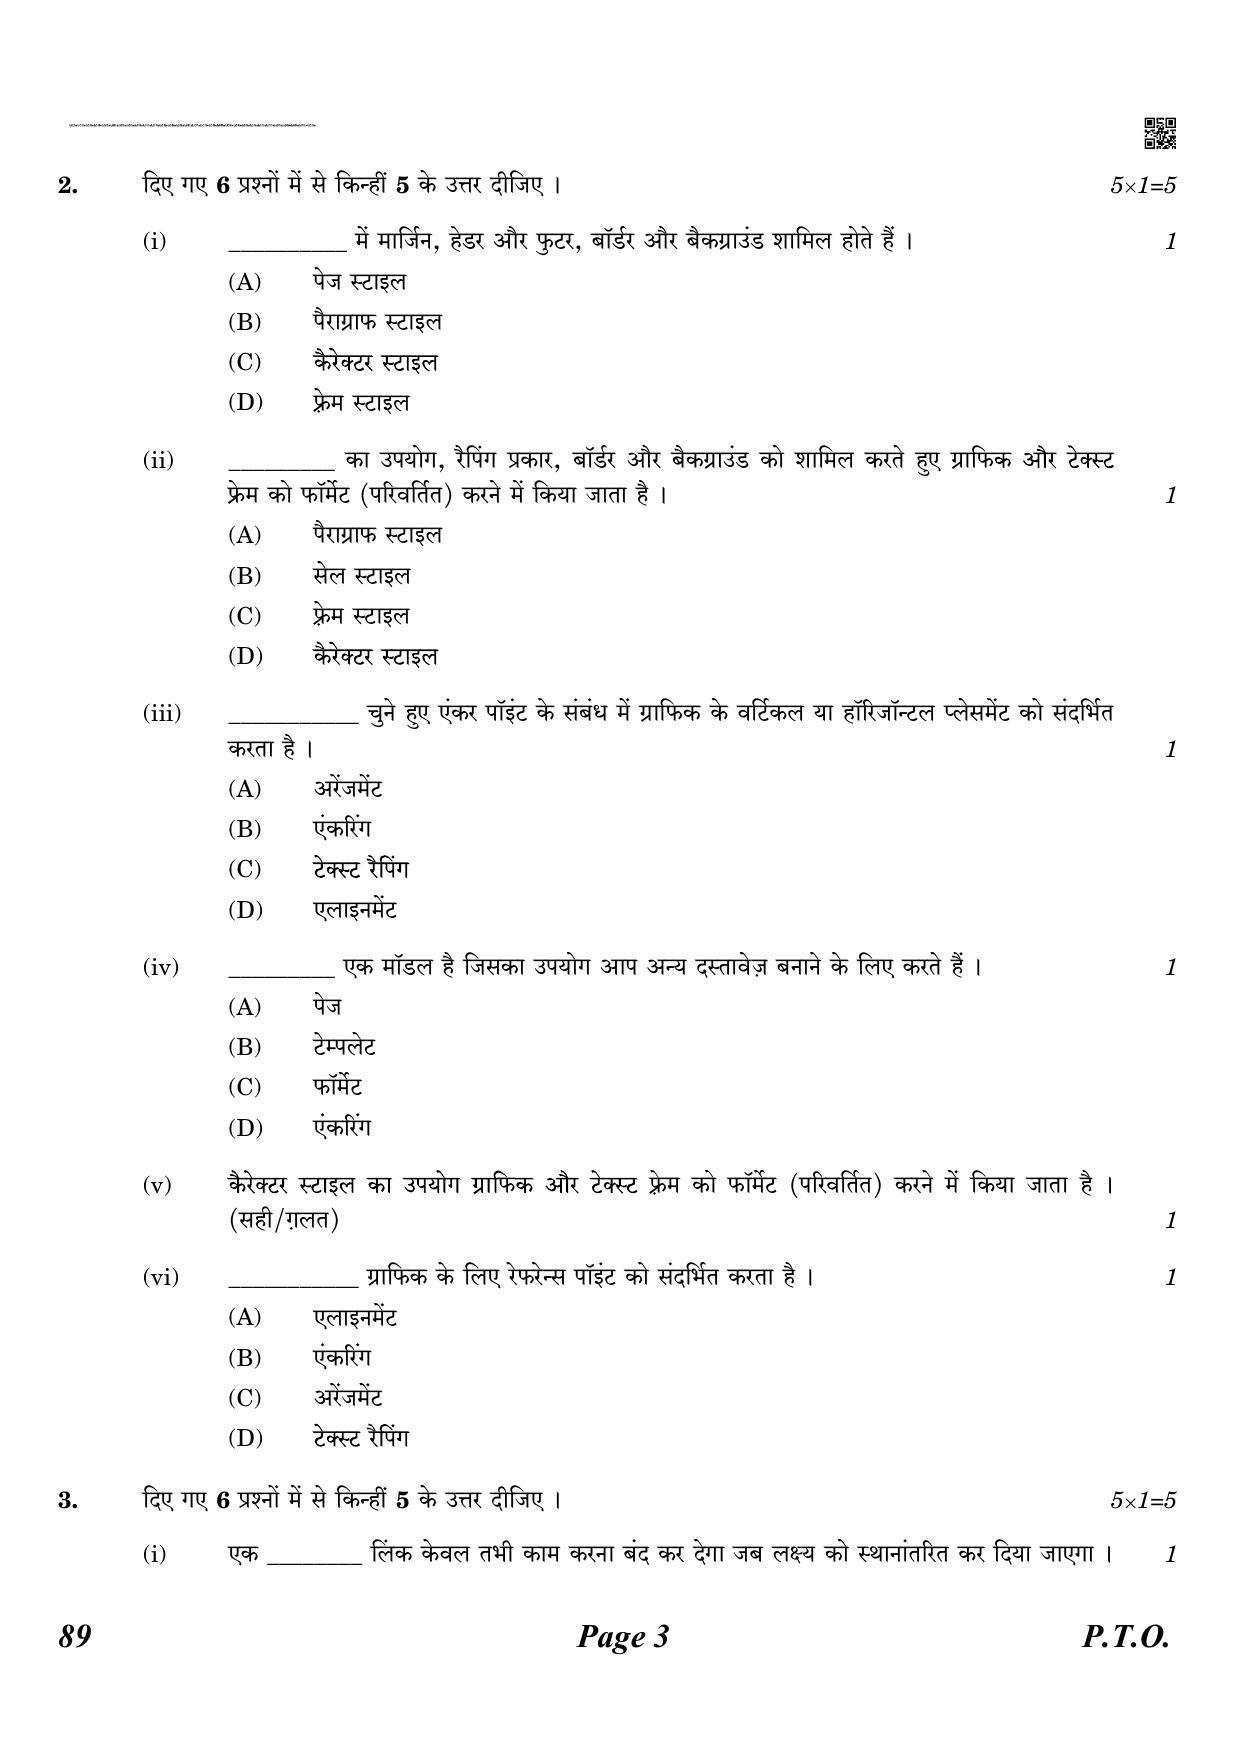 CBSE Class 10 QP_402_INFORMATION_TECH_HINDI 2021 Compartment Question Paper - Page 3